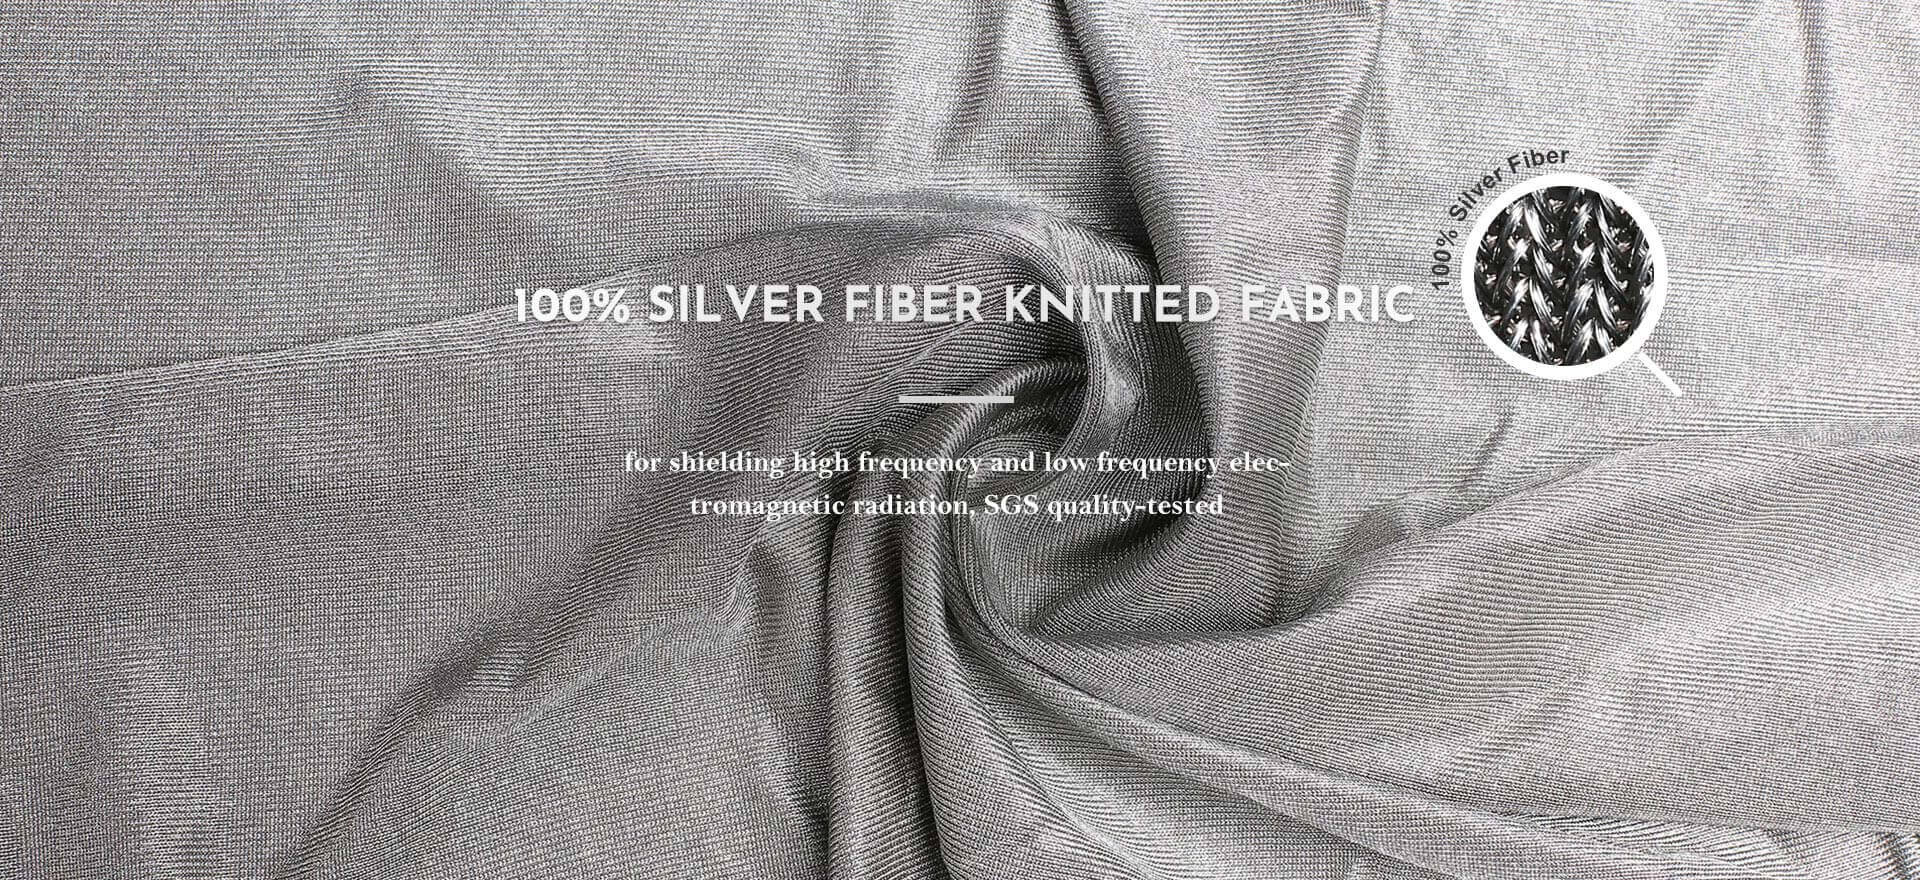 100% Silver Fiber Knitted Fabric